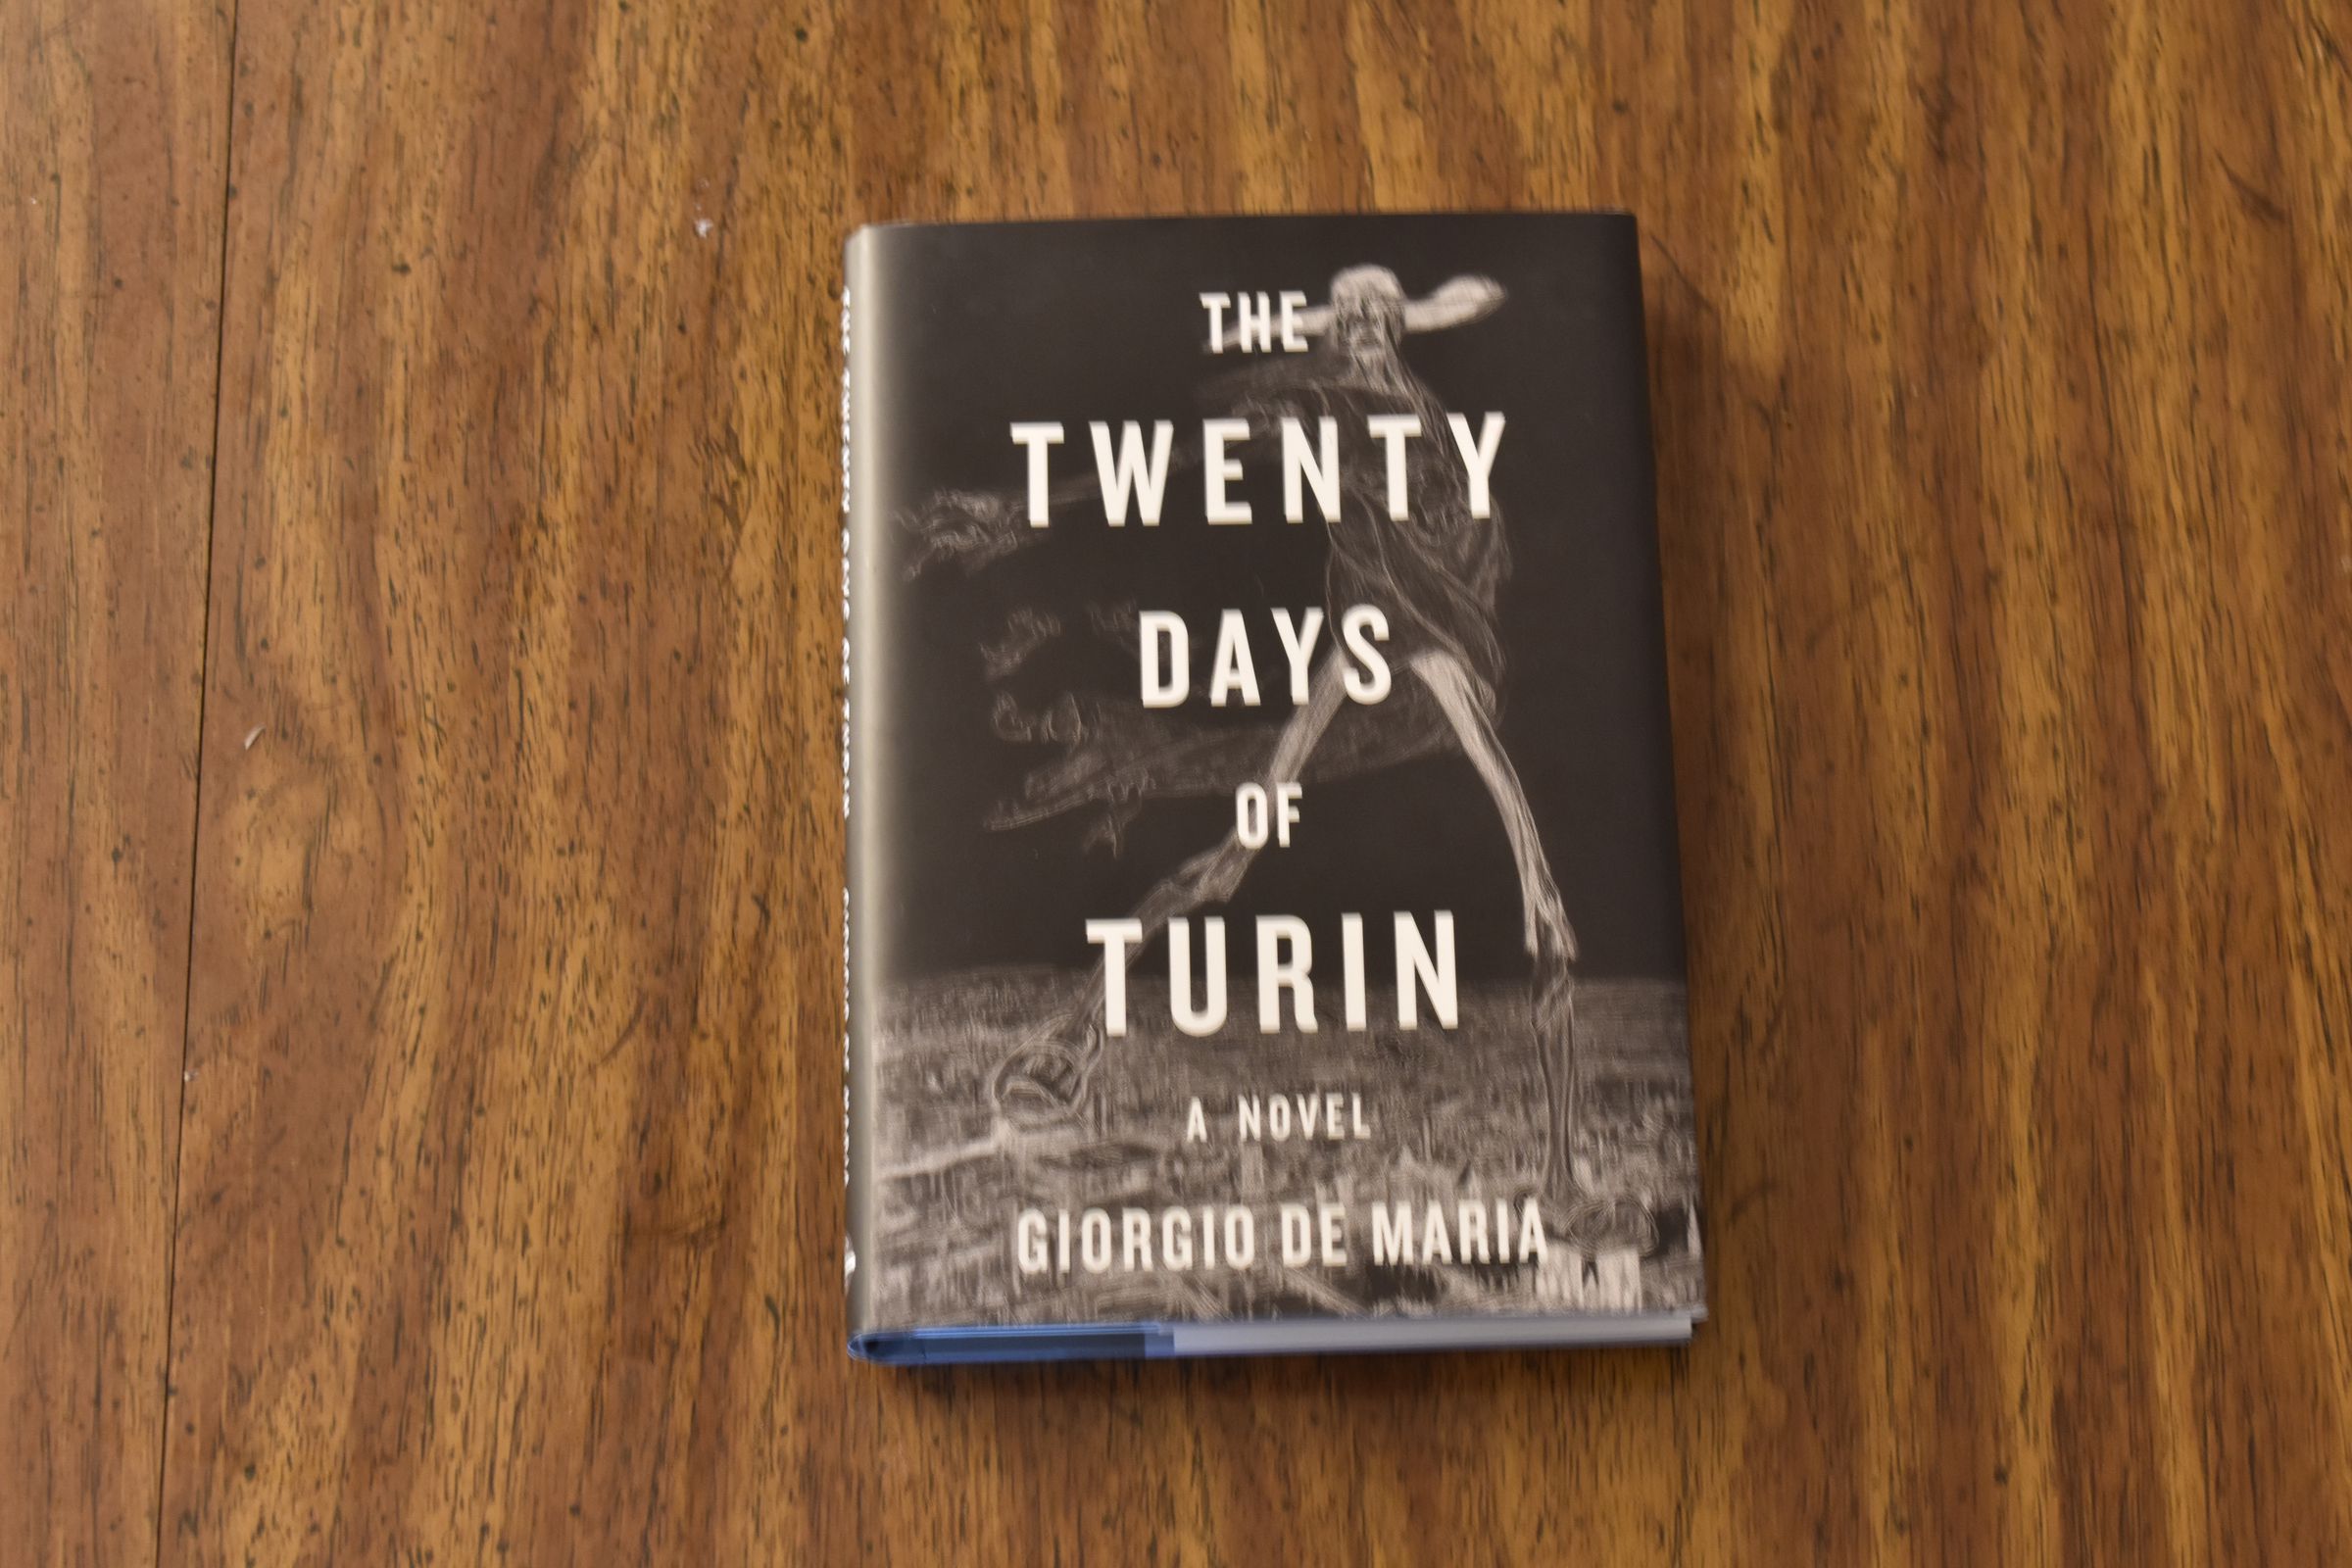 A photograph of the cover of The Twenty Days of Turin